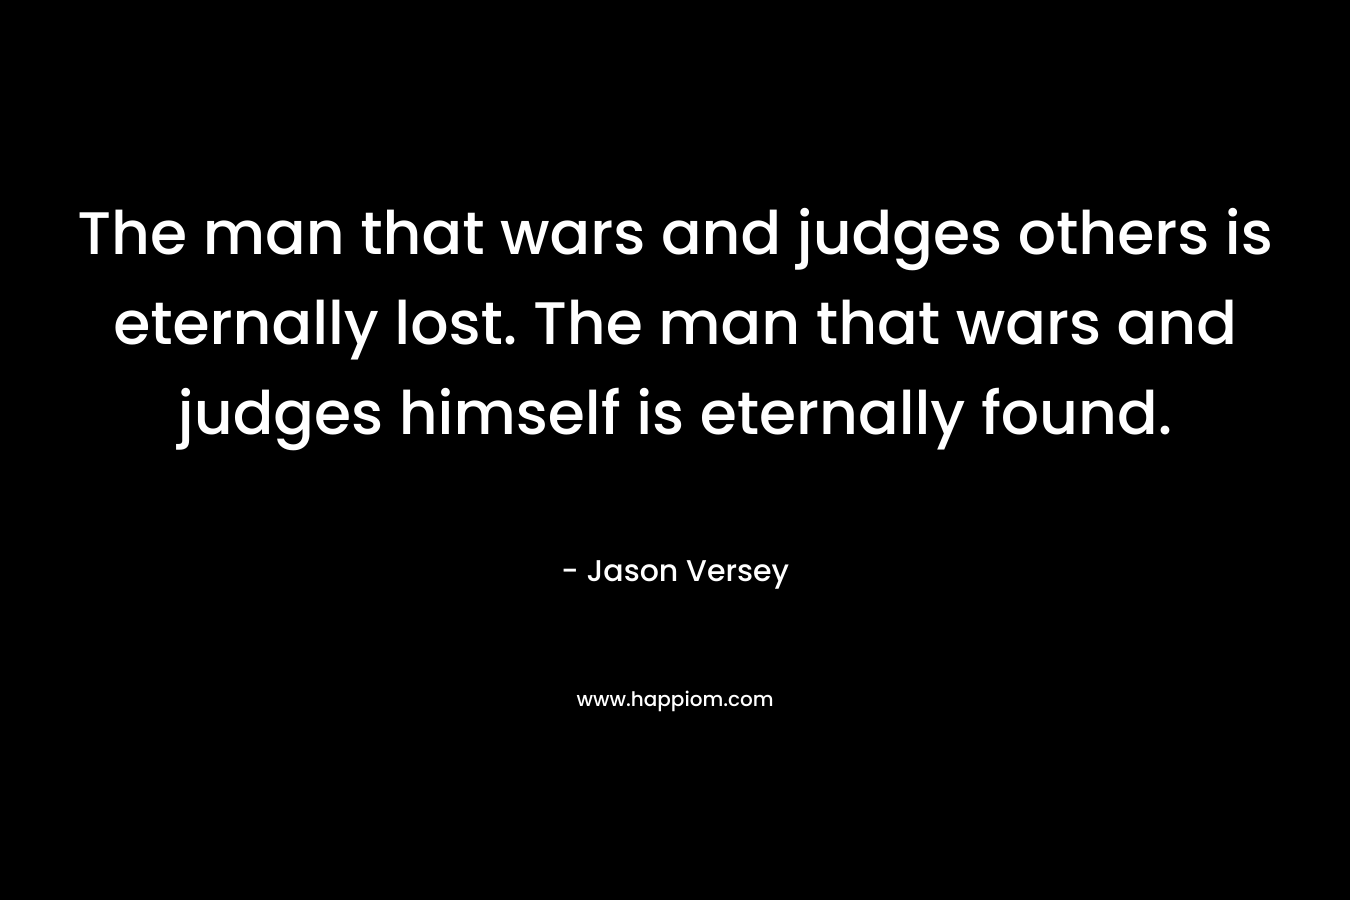 The man that wars and judges others is eternally lost. The man that wars and judges himself is eternally found.